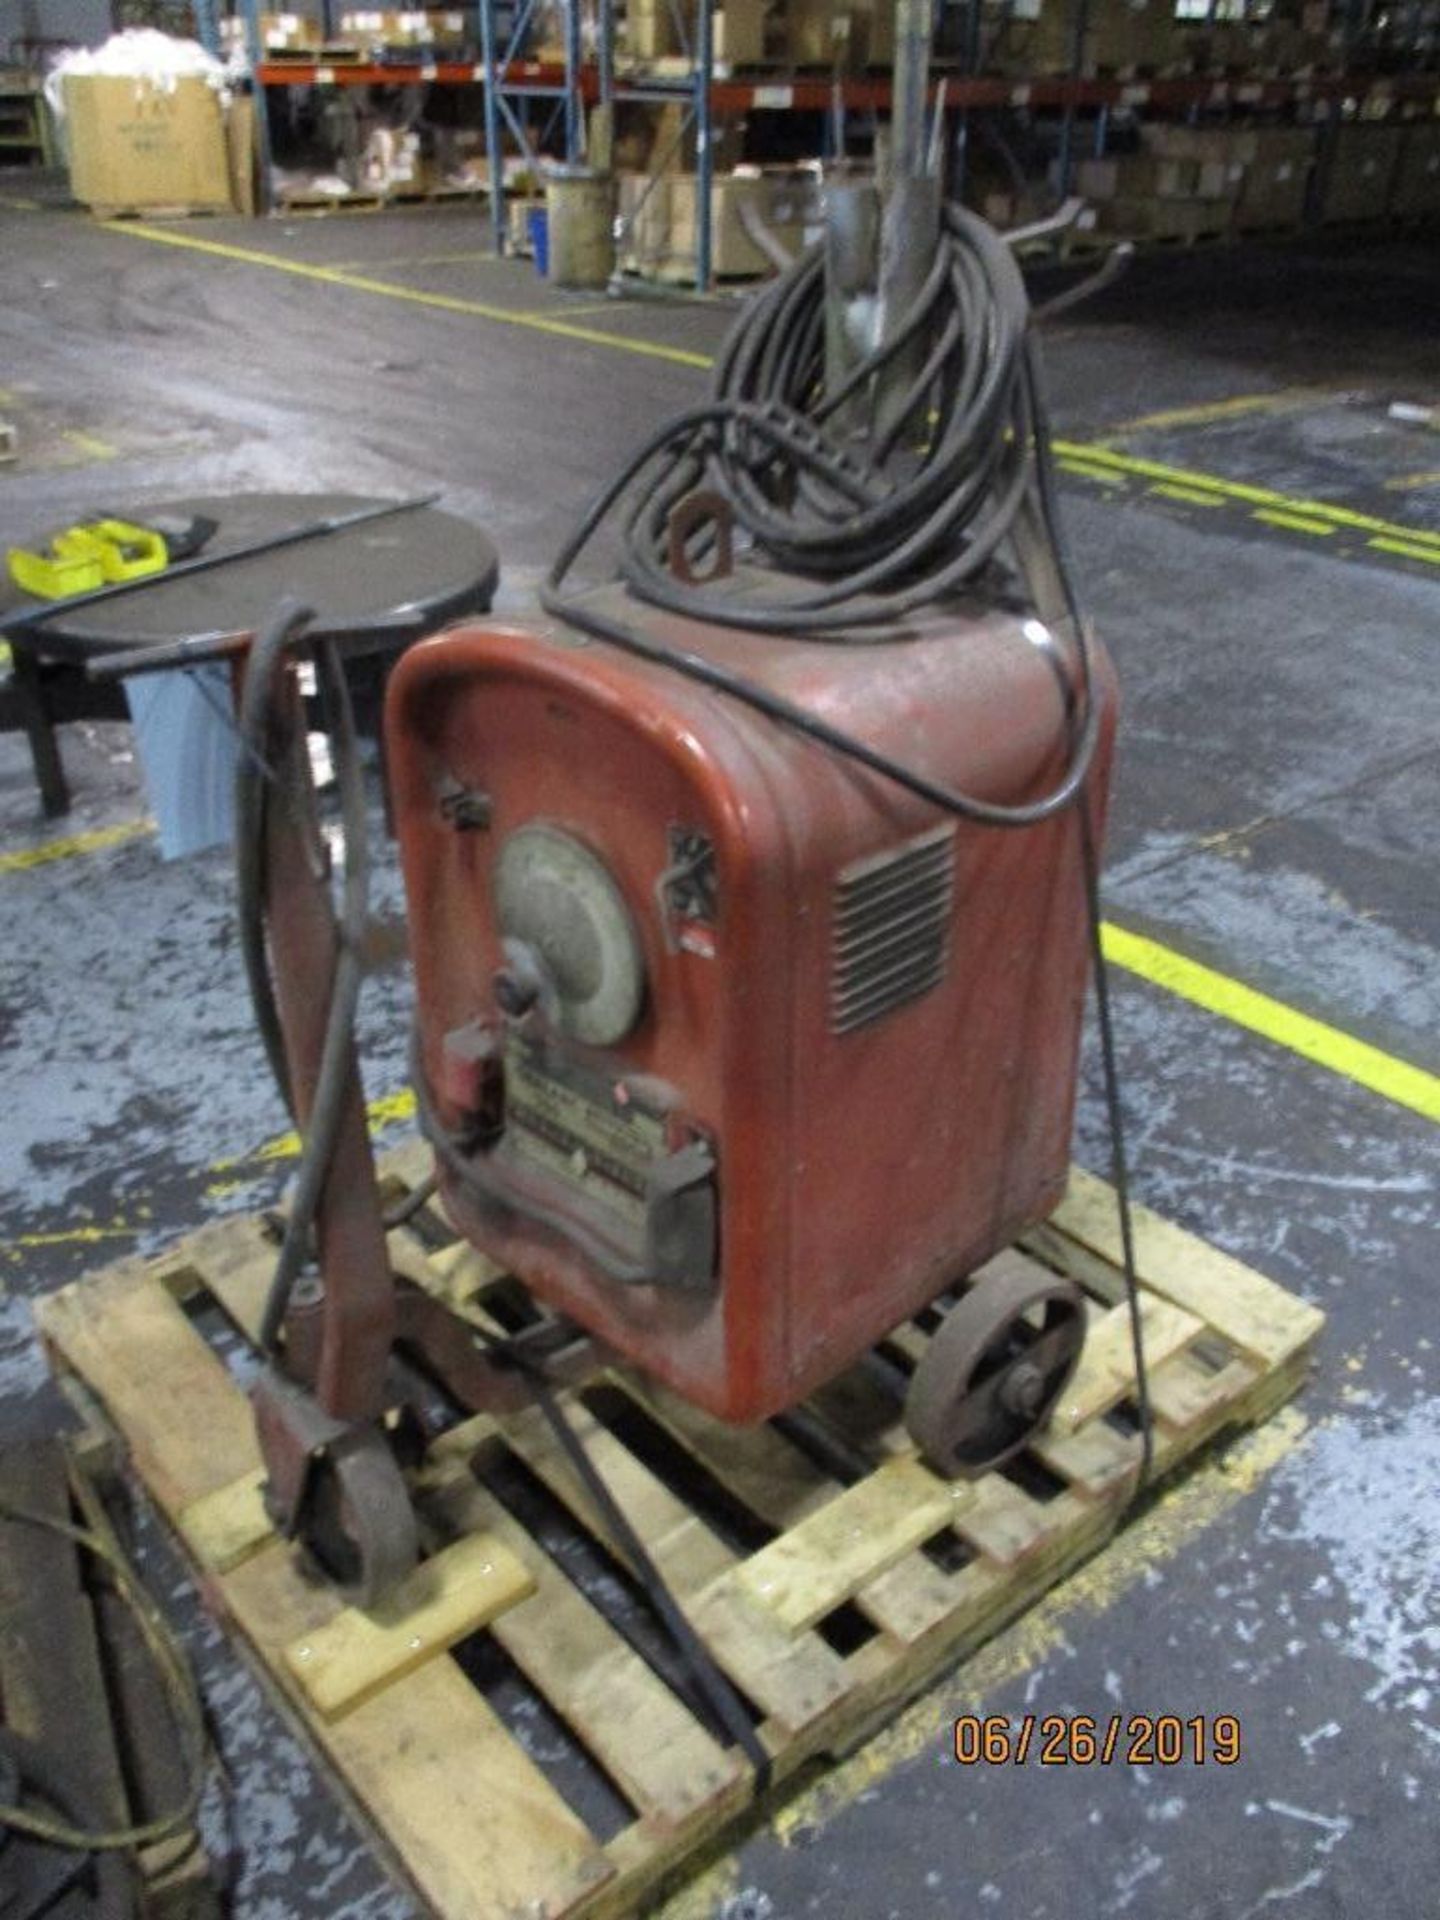 Lincoln Idealarc 250 Welder S/N AC-271770, Located at 800 West Broadway St. Three Rivers, MI. 49136 - Image 2 of 2